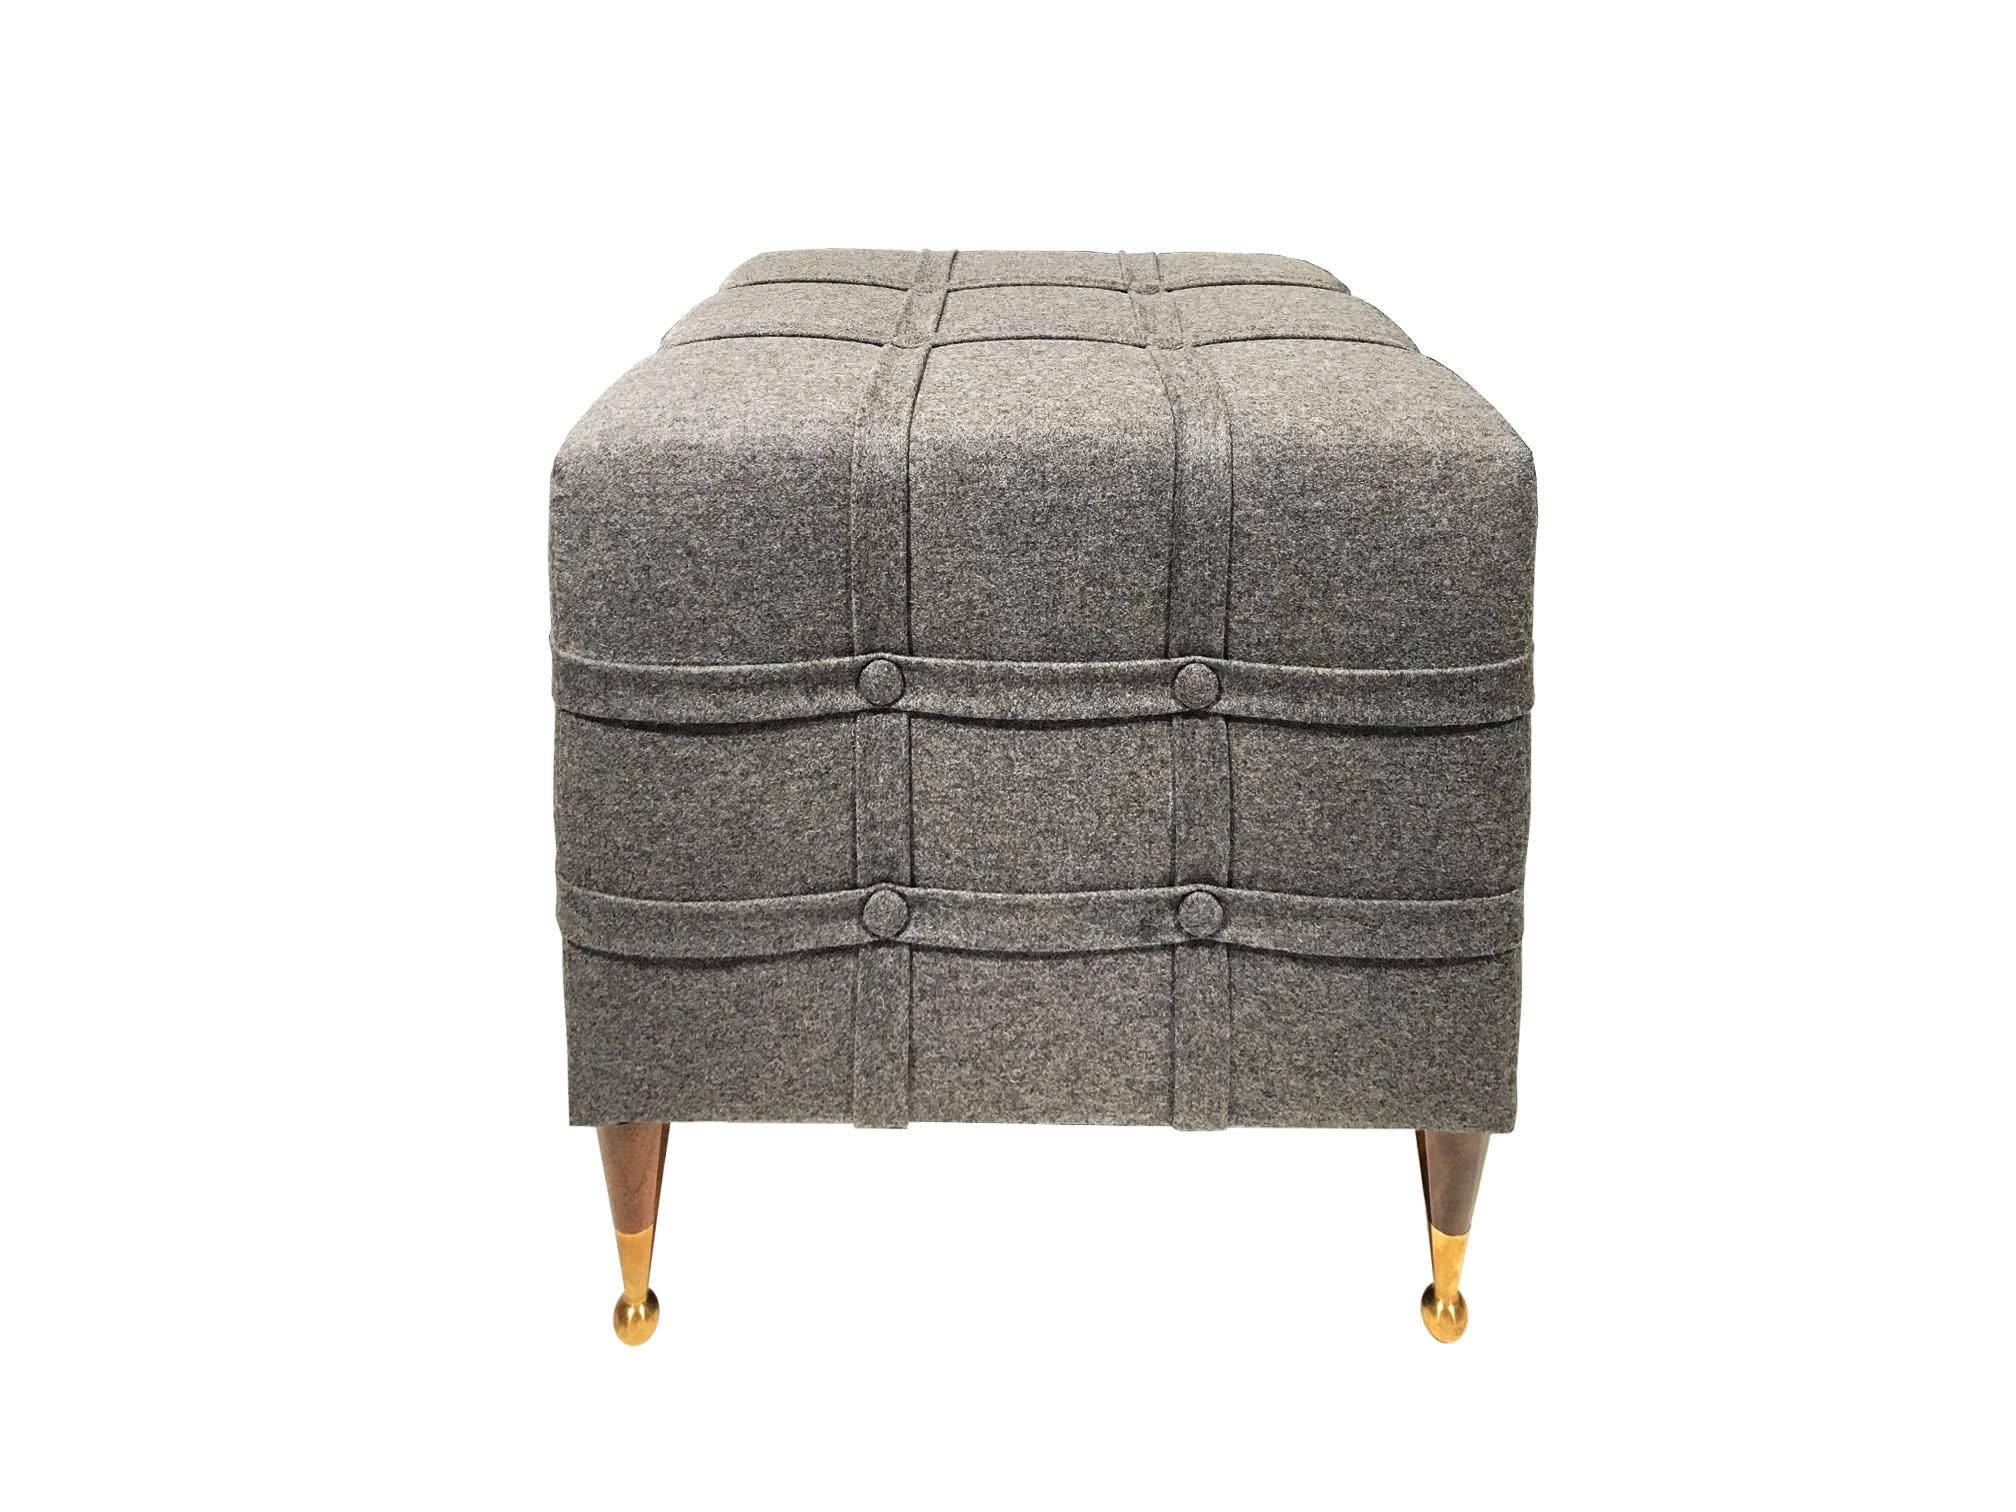 The Soho Claremont Ottoman, designed by Irwin Feld for CF MODERN, has a plush cushion wrapped in four straps with button details. The cushion stands on four cone shaped Claremont legs with brass sabots. Shown here in grey flannel.

CF MODERN